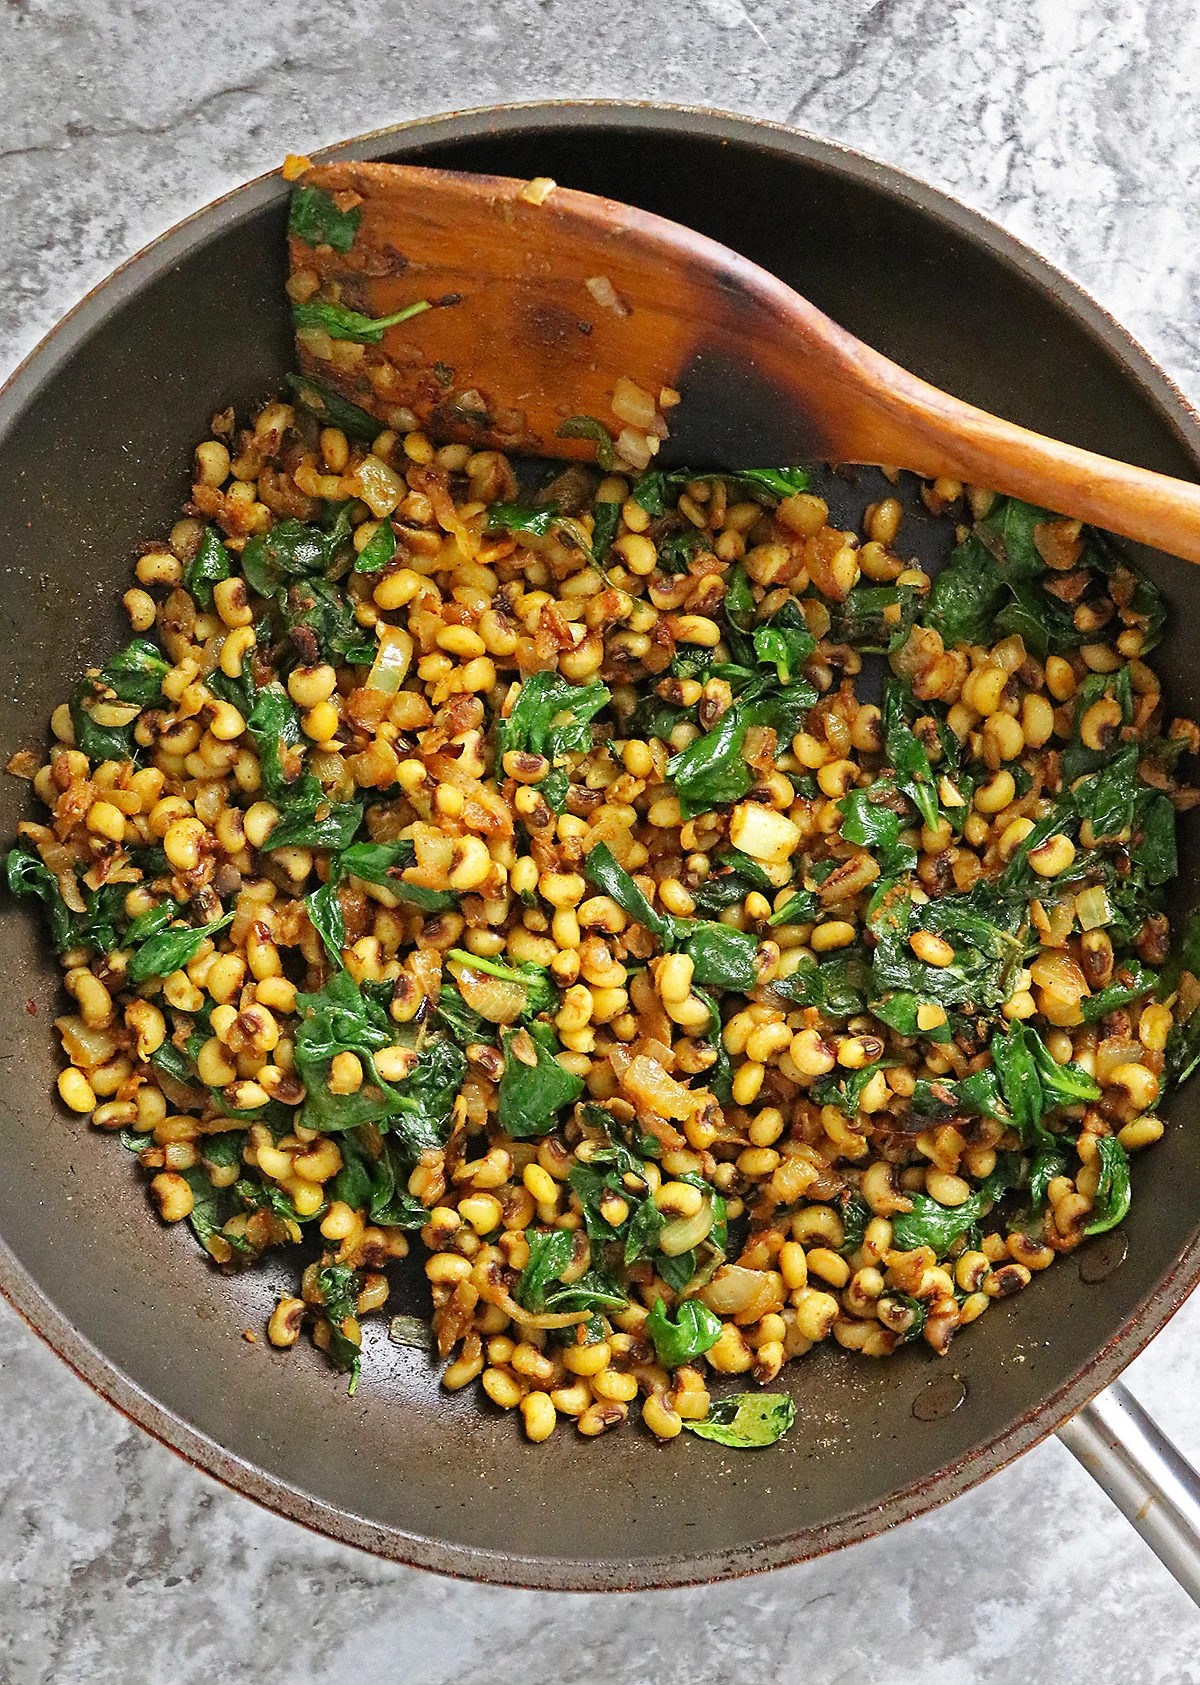 This Filling with black-eyed peas and greens is so tasty